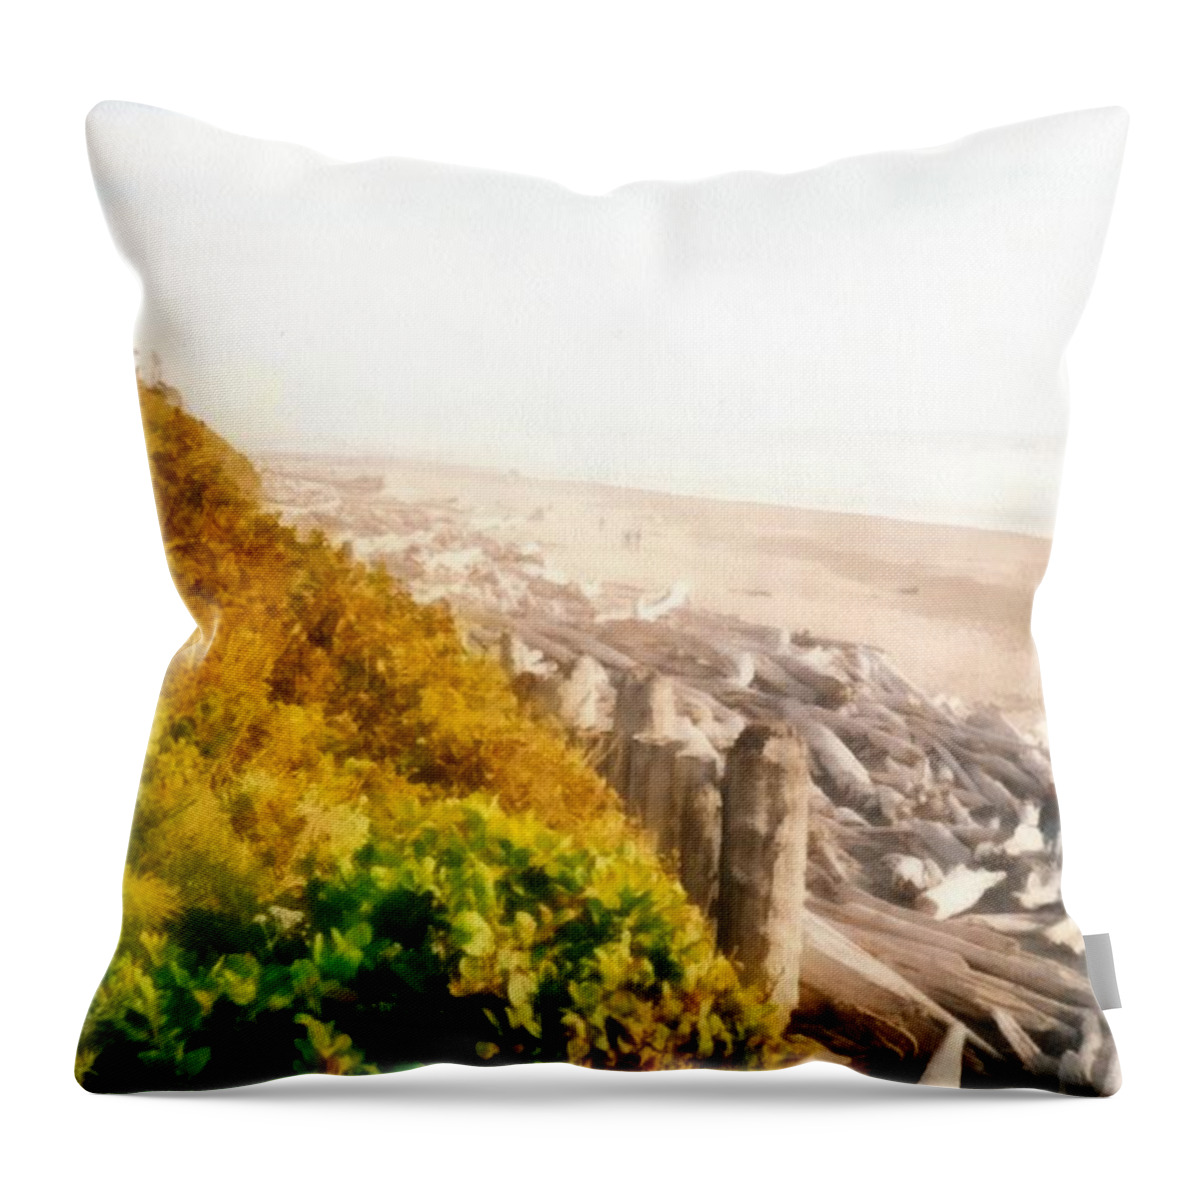 Washington State Coastline Throw Pillow featuring the photograph Olympic Peninsula Driftwood by Michelle Calkins